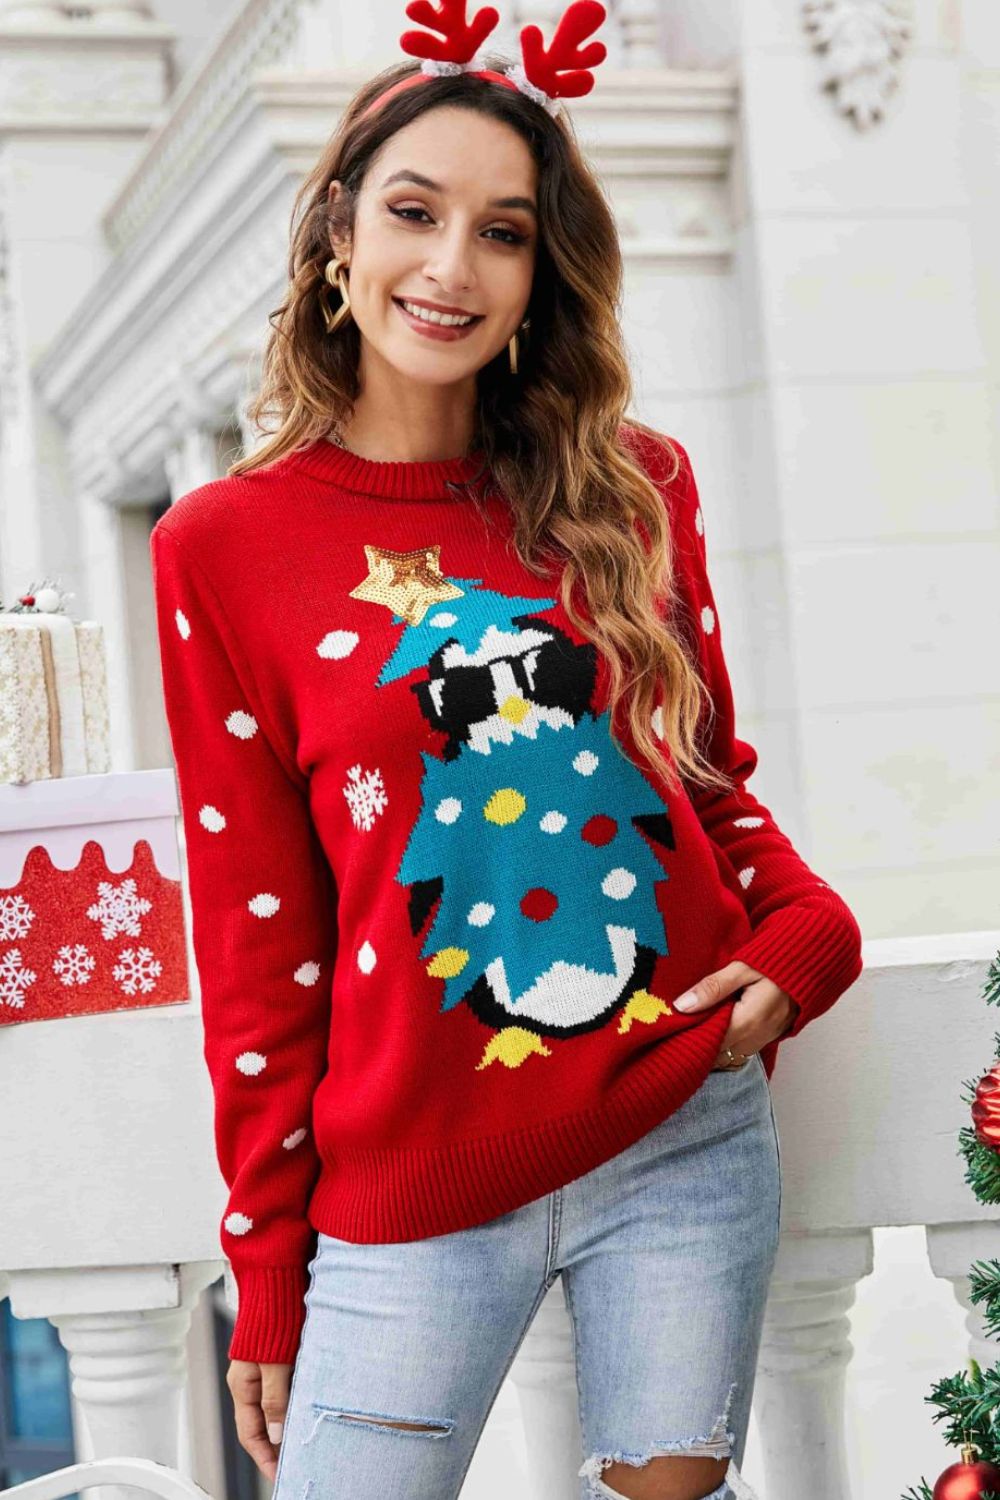 Christmas Penguin Graphic Sequin Sweater is moderate stretch